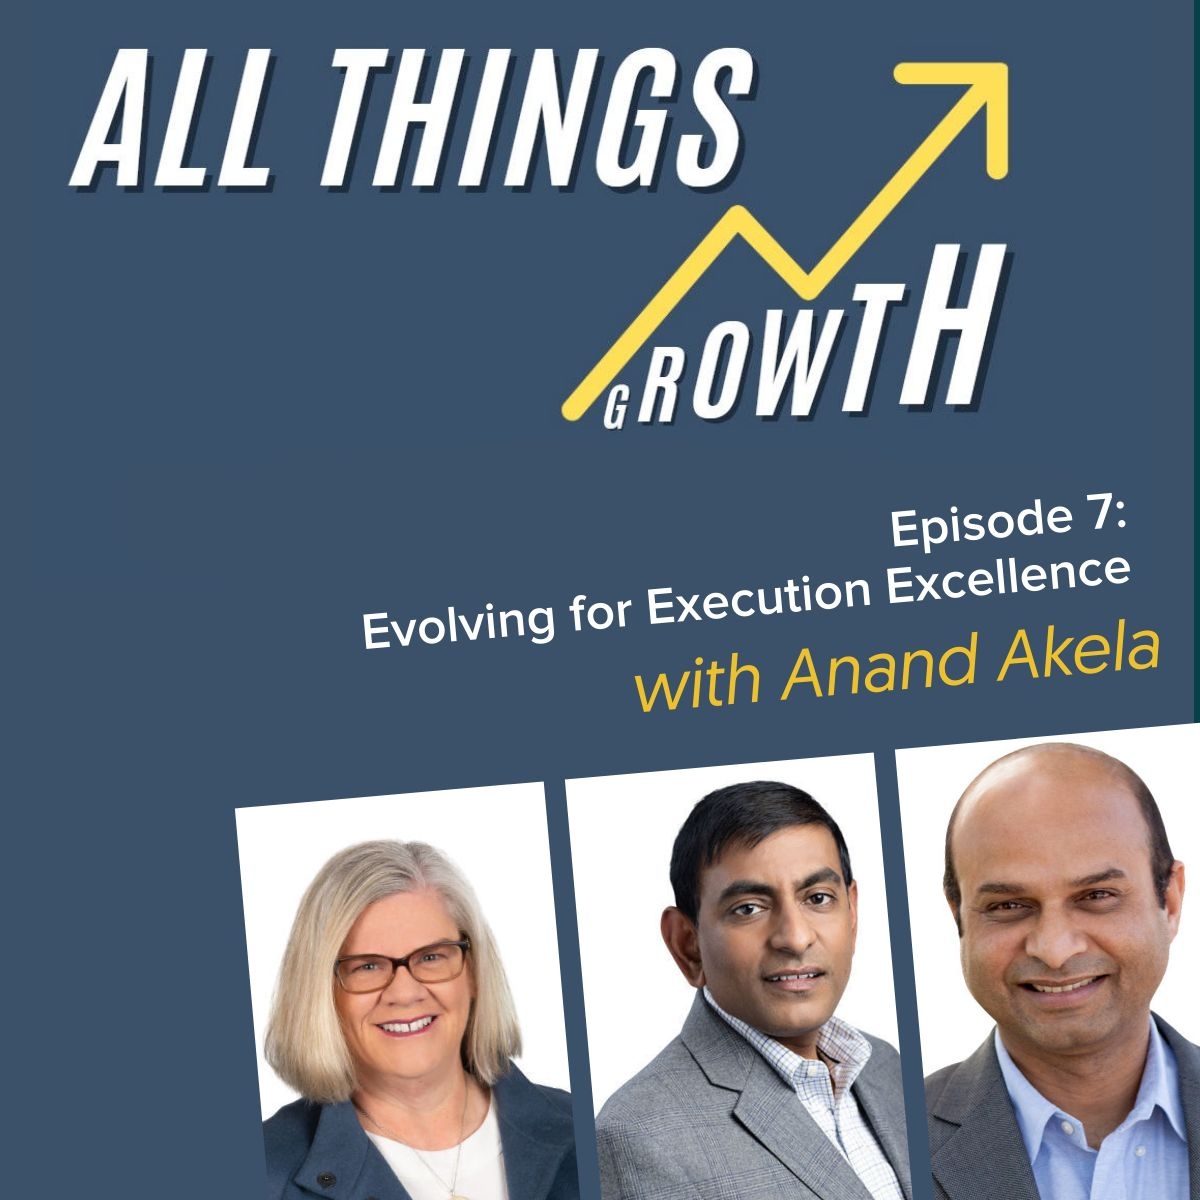 Episode 7 Evolving for Execution Excellence with Anand Akela